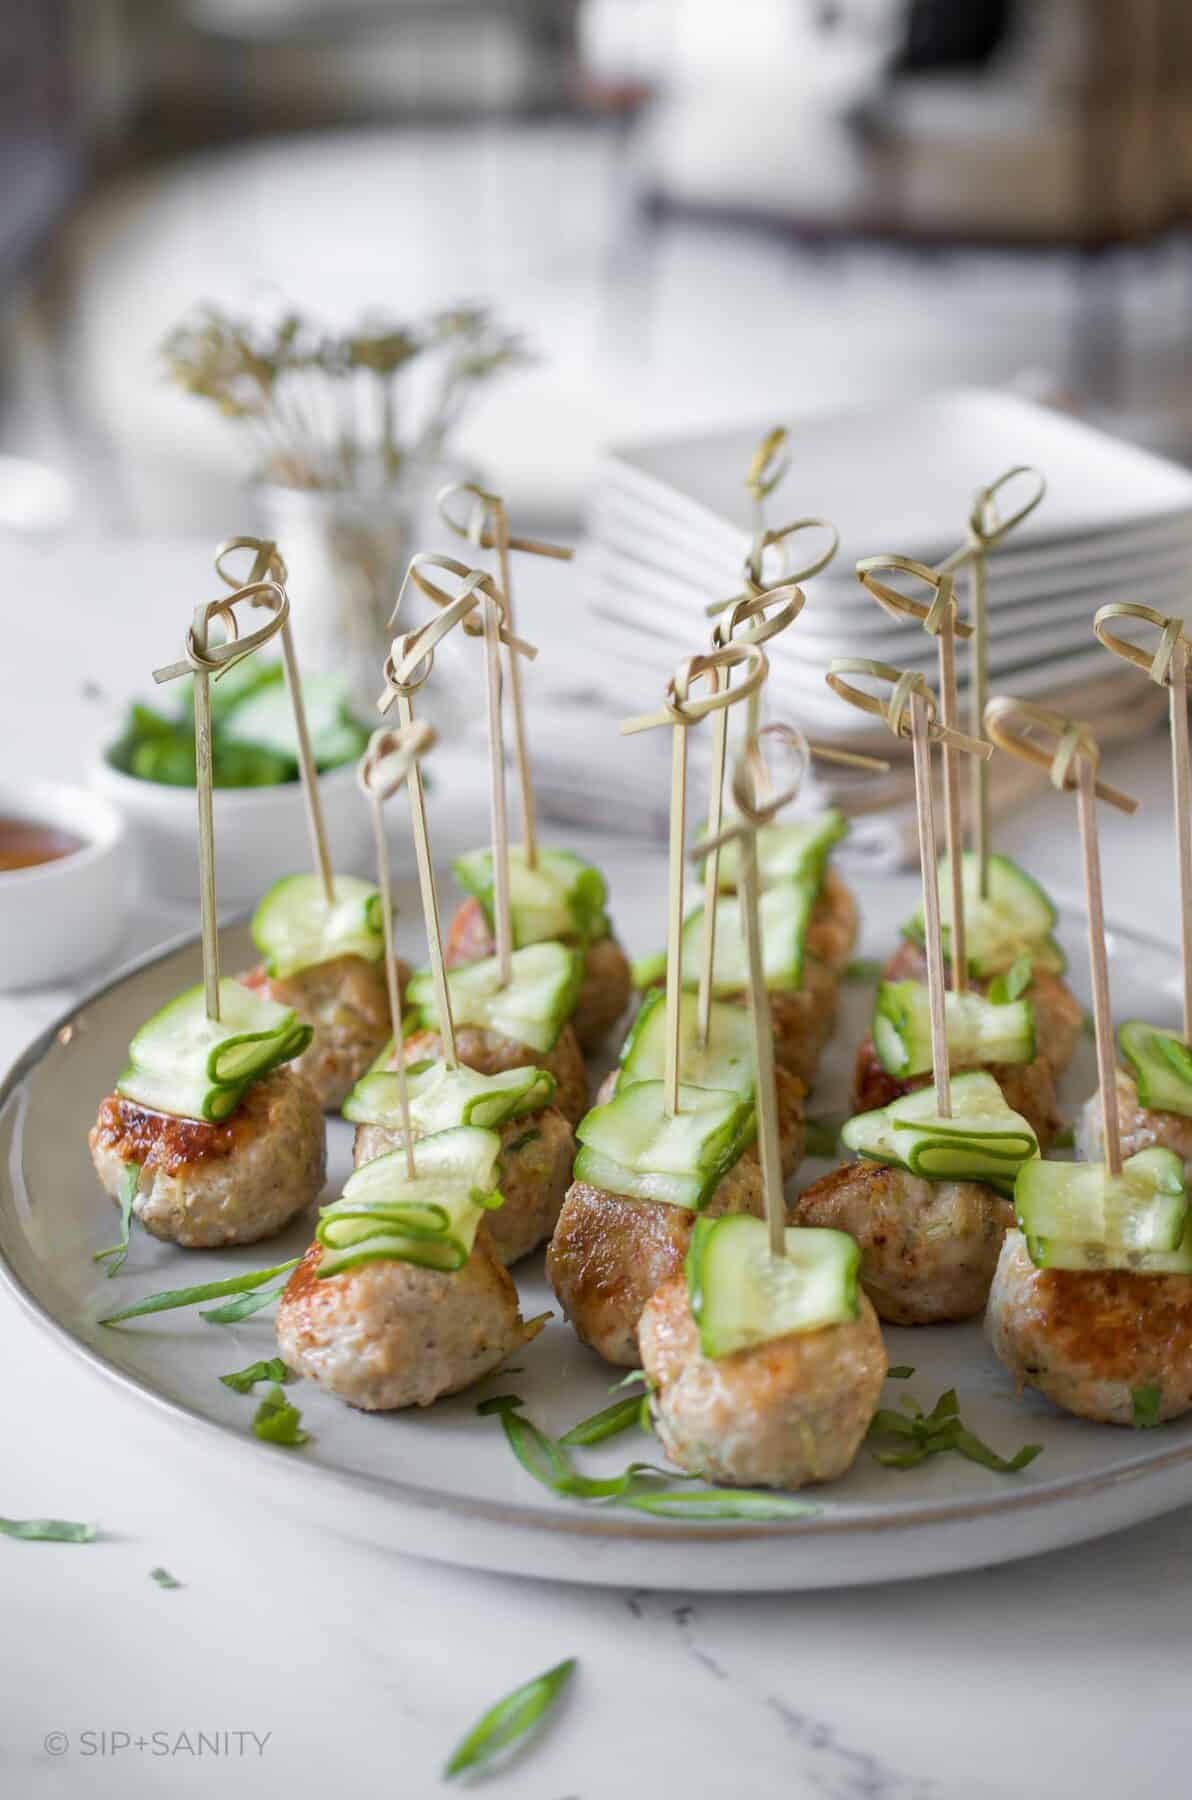 A platter of asian style meatballs topped with cucumber ribbons on cocktail picks.